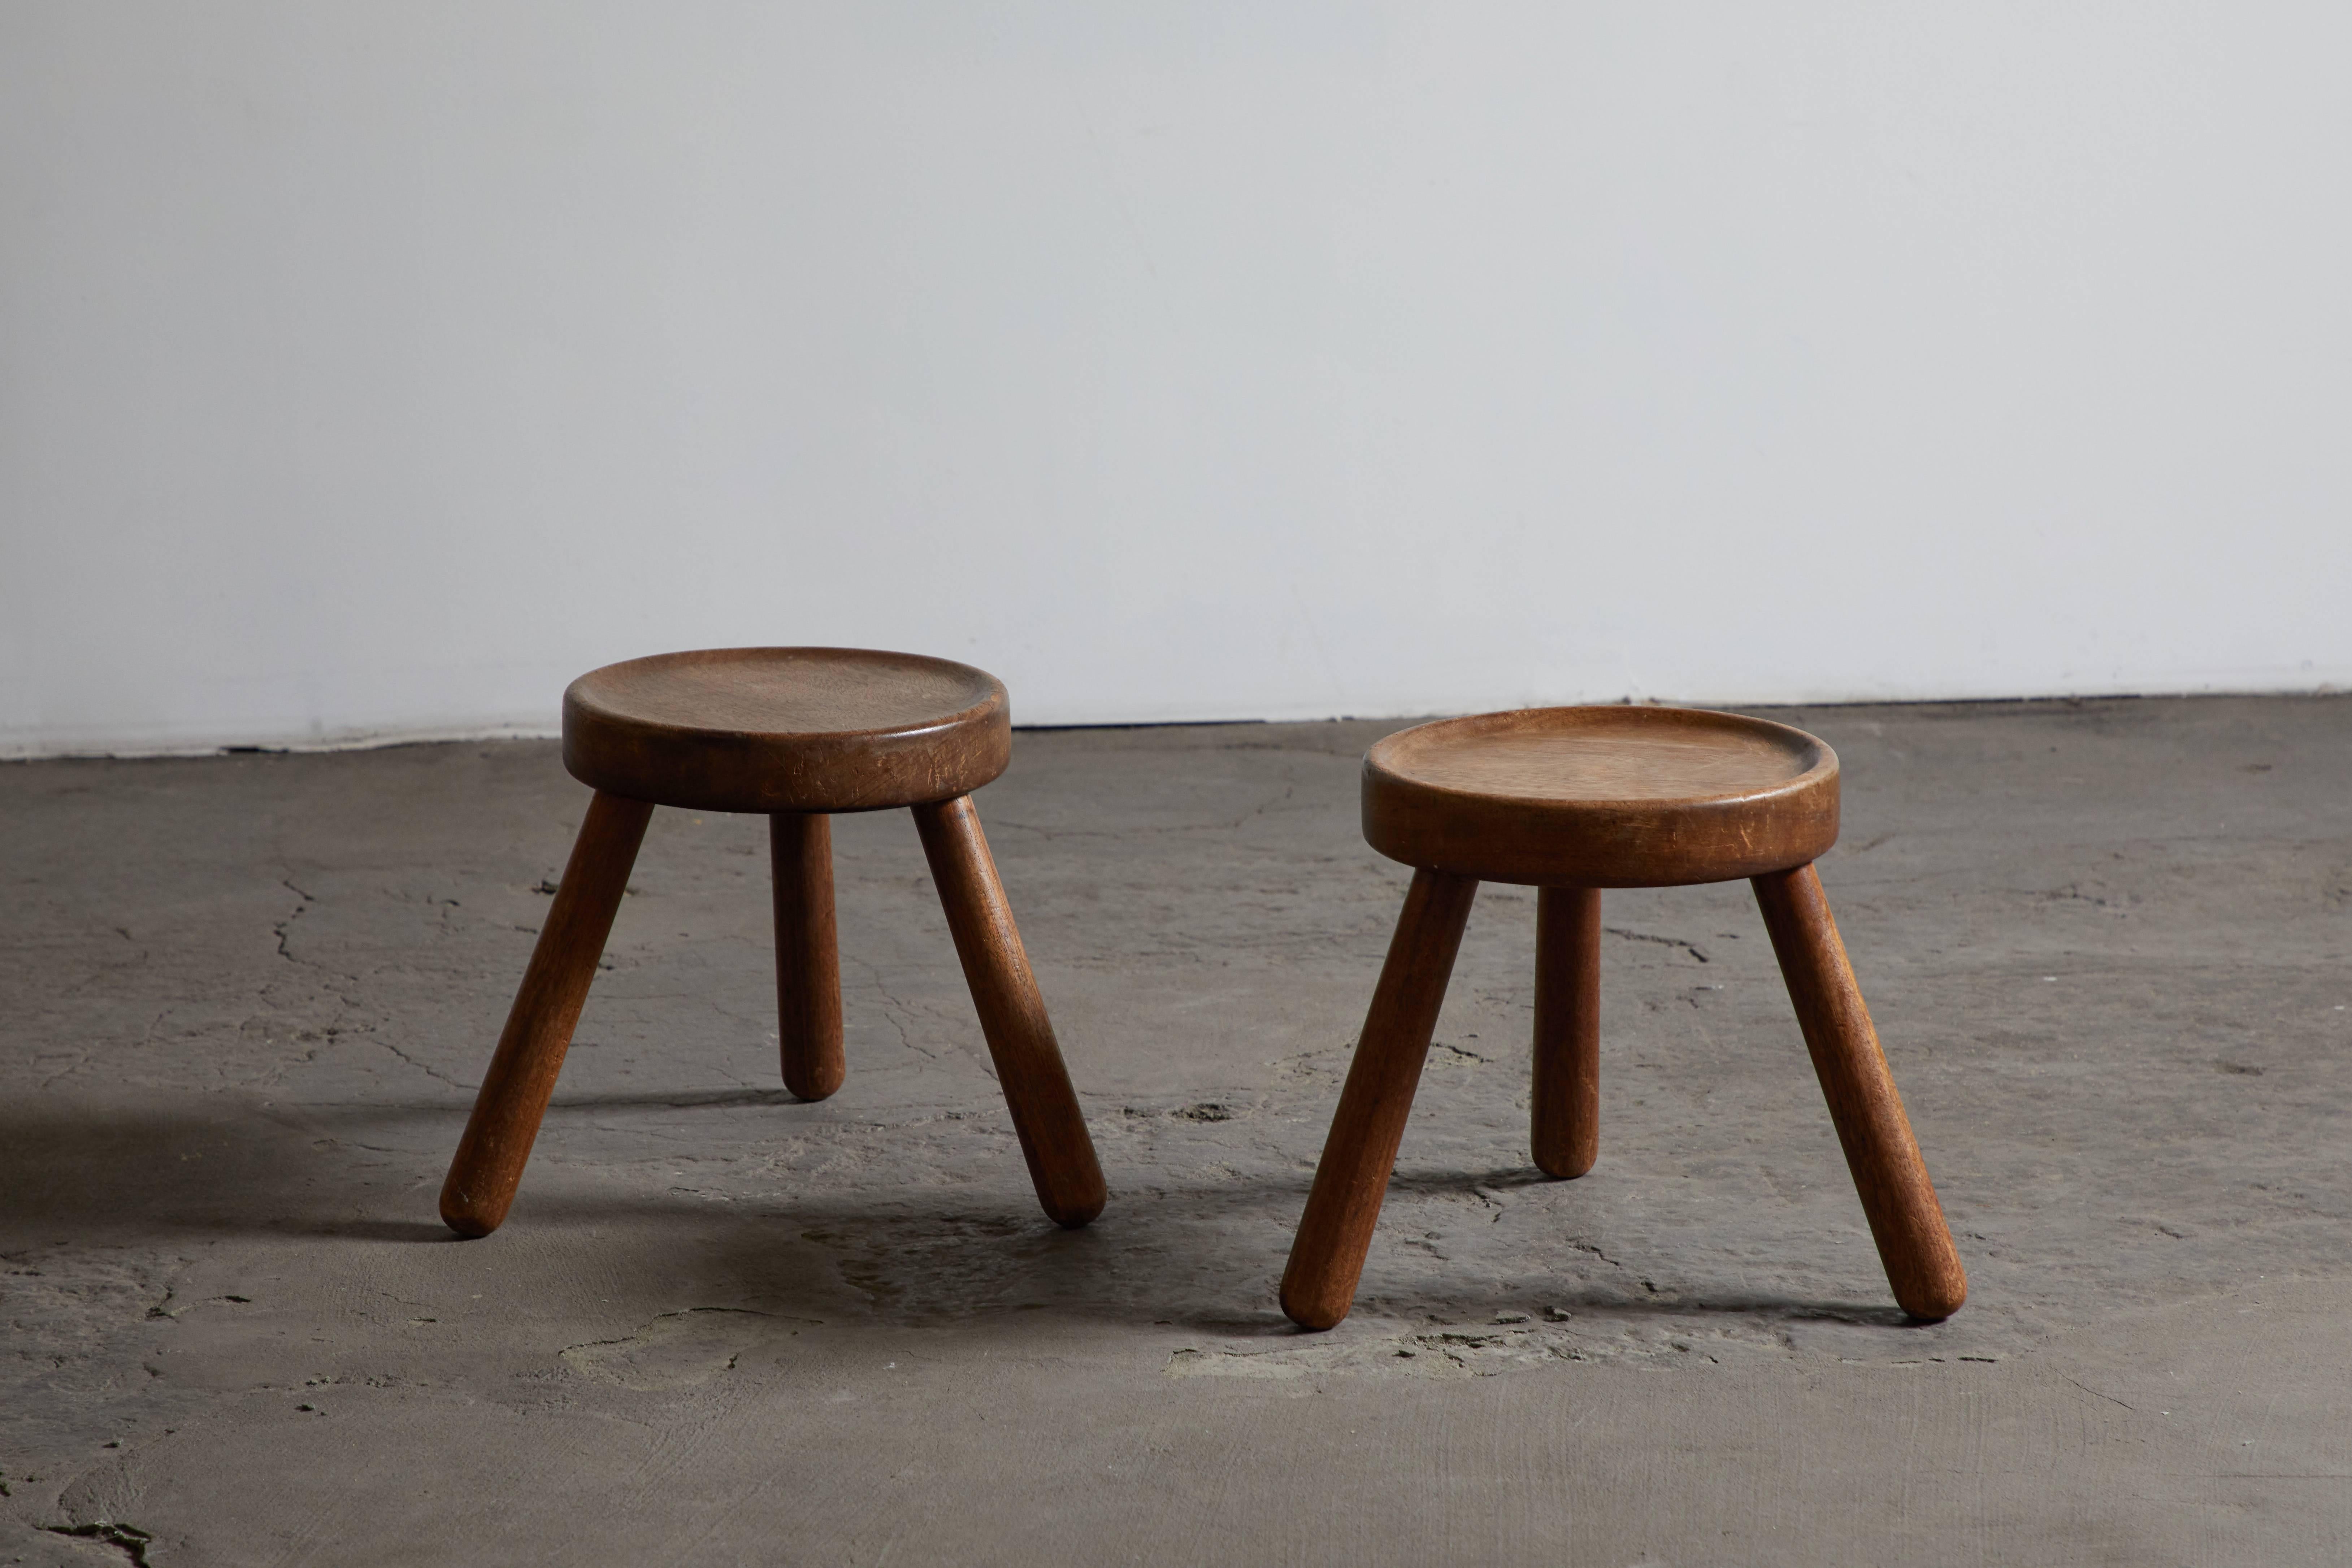 Pair of modernist wood three-legged stools. Made in France, circa 1950s.